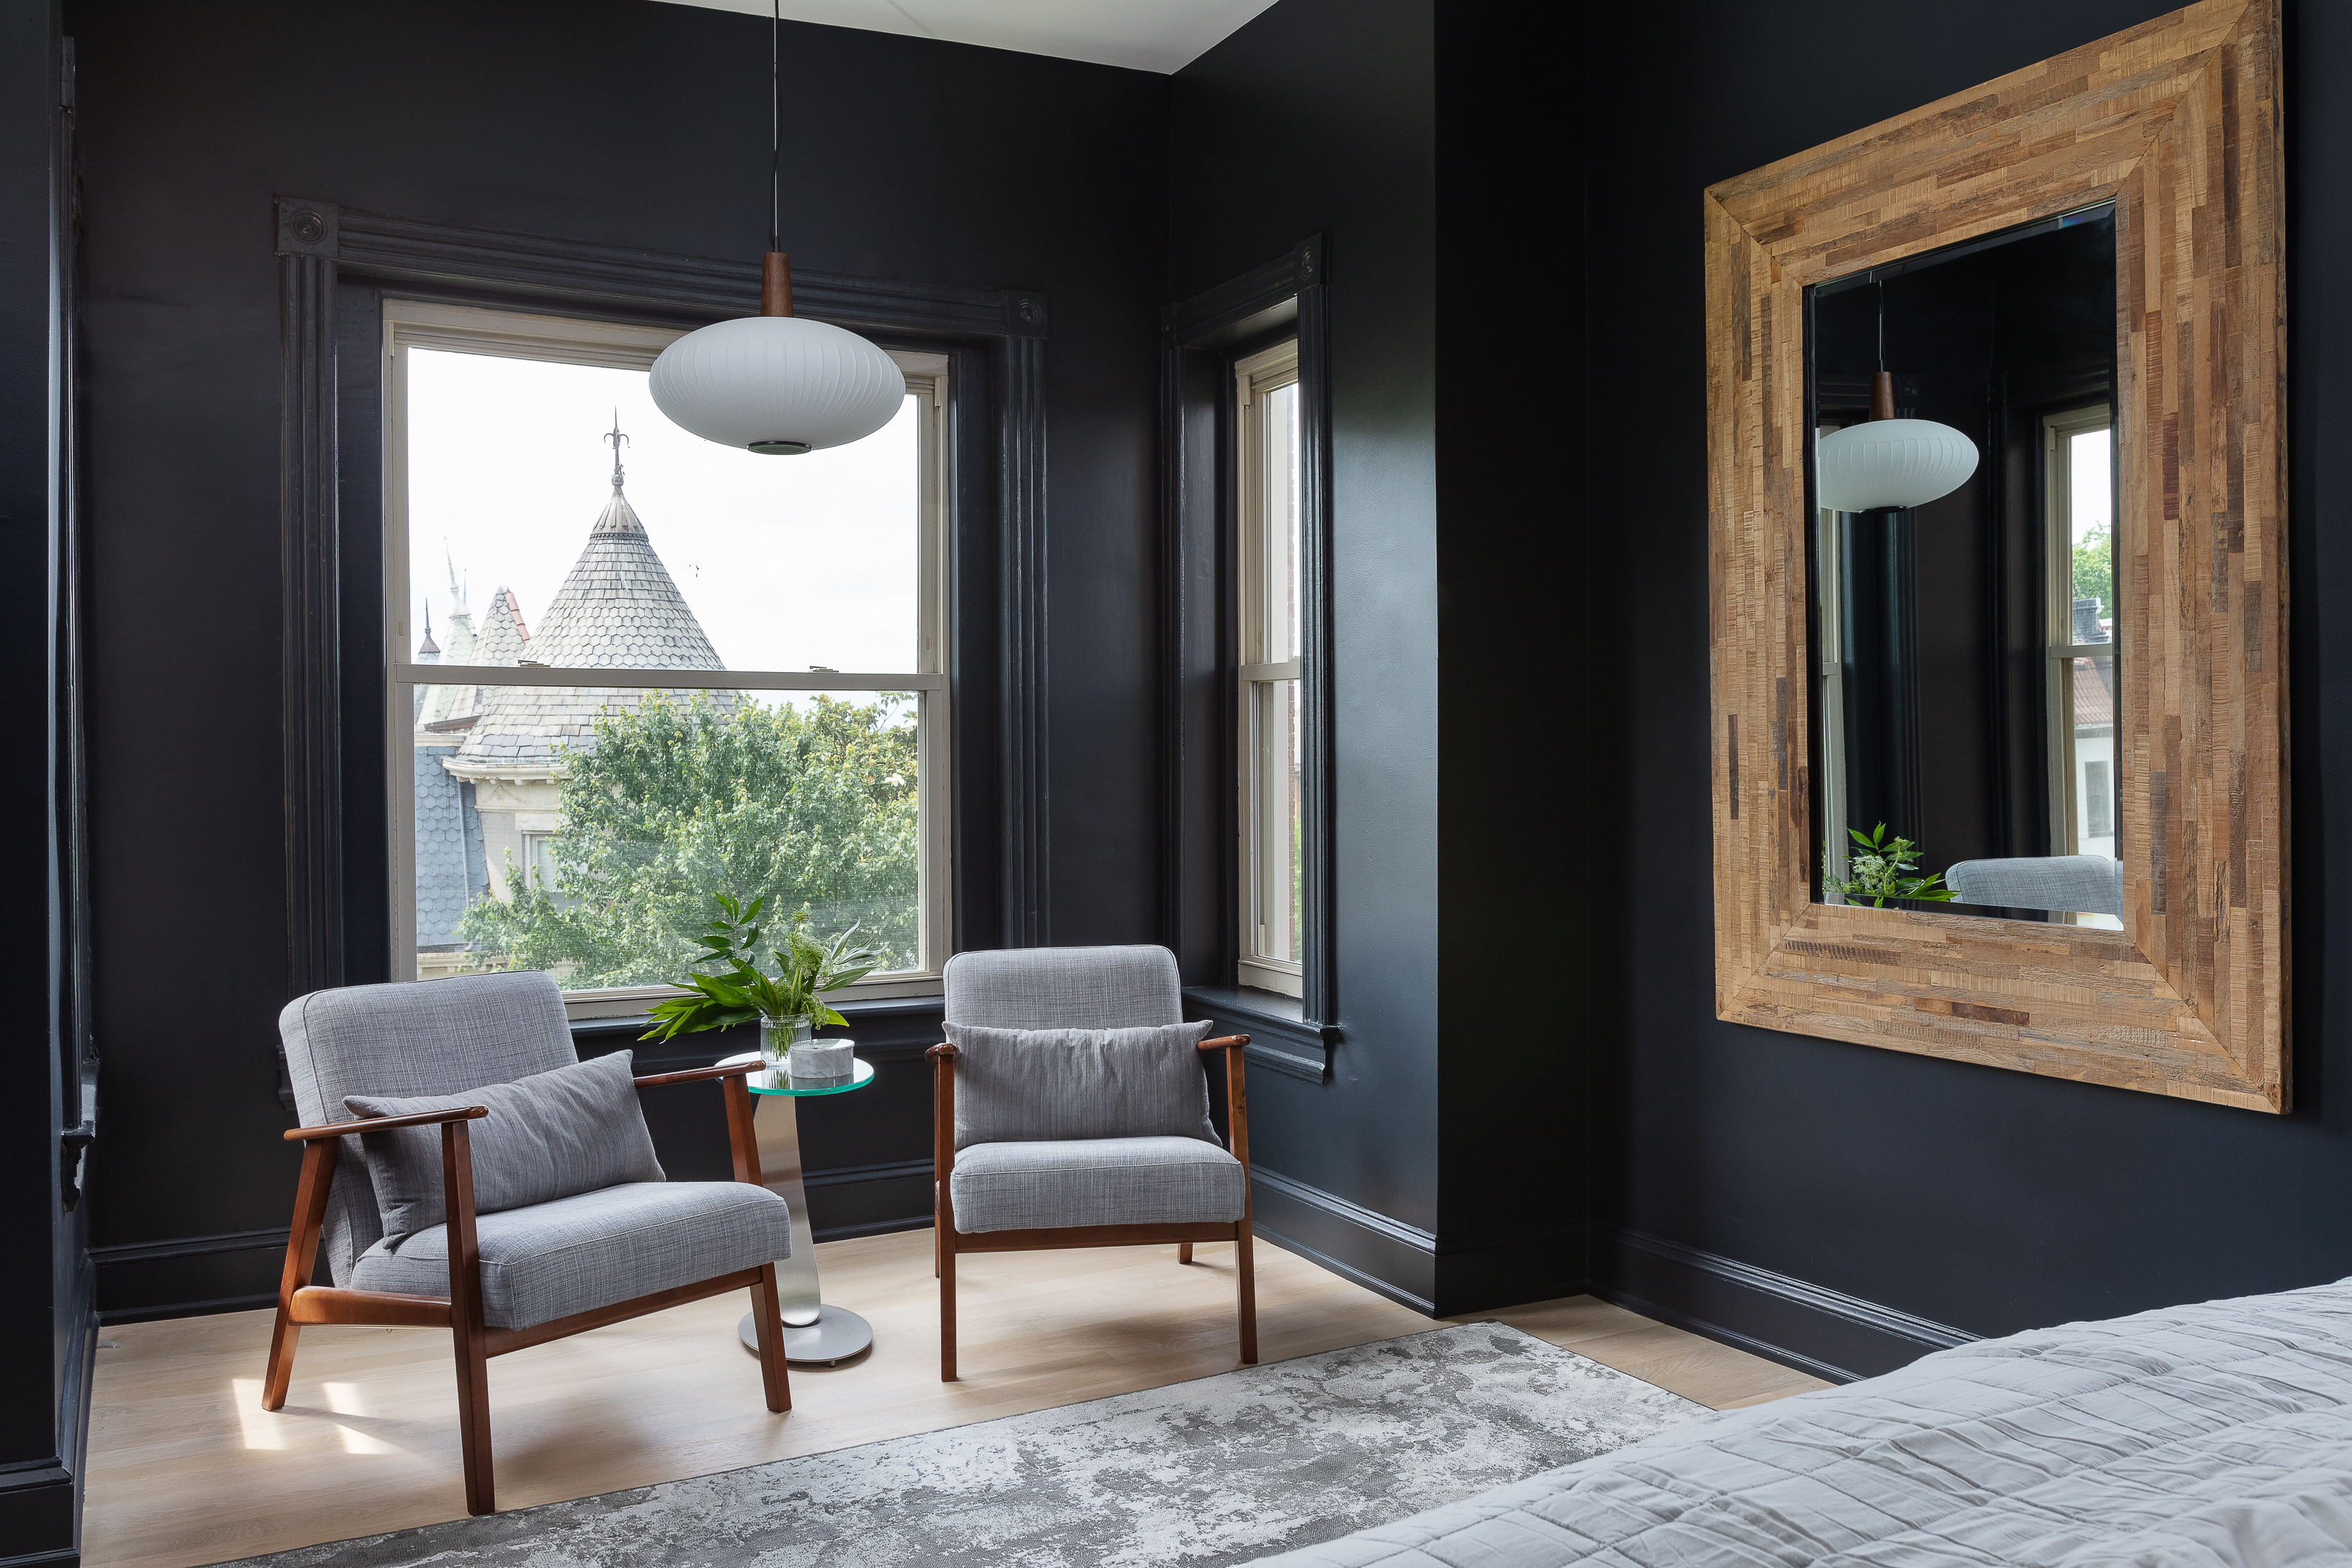 A bedroom with dark navy walls and mid century style furniture